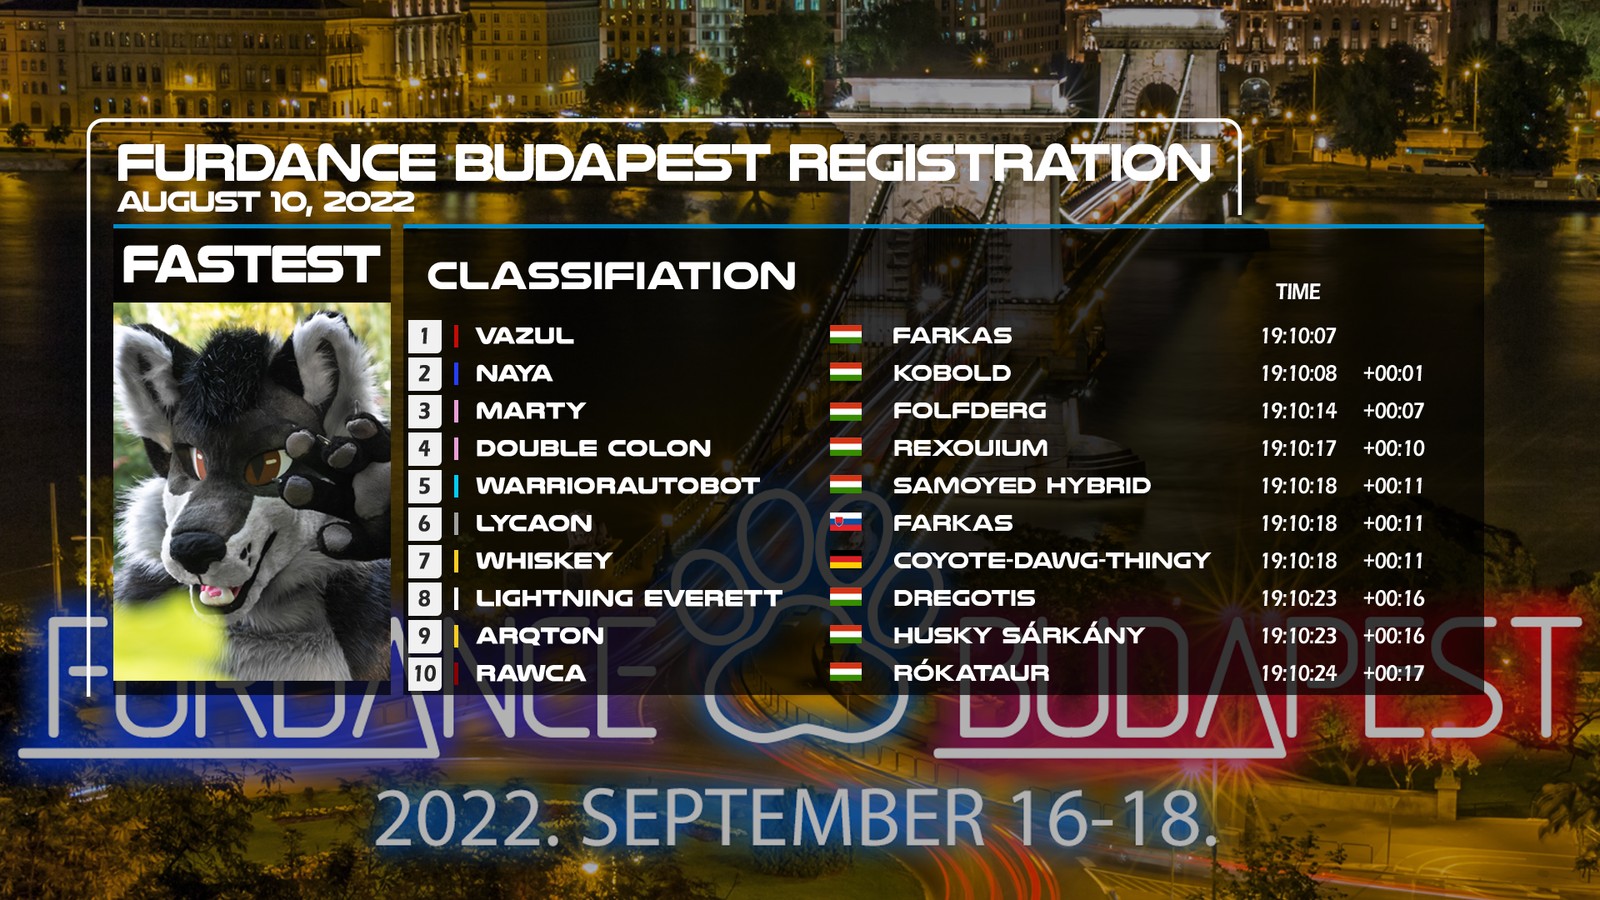 TOP 10 - This is how this year's registration started